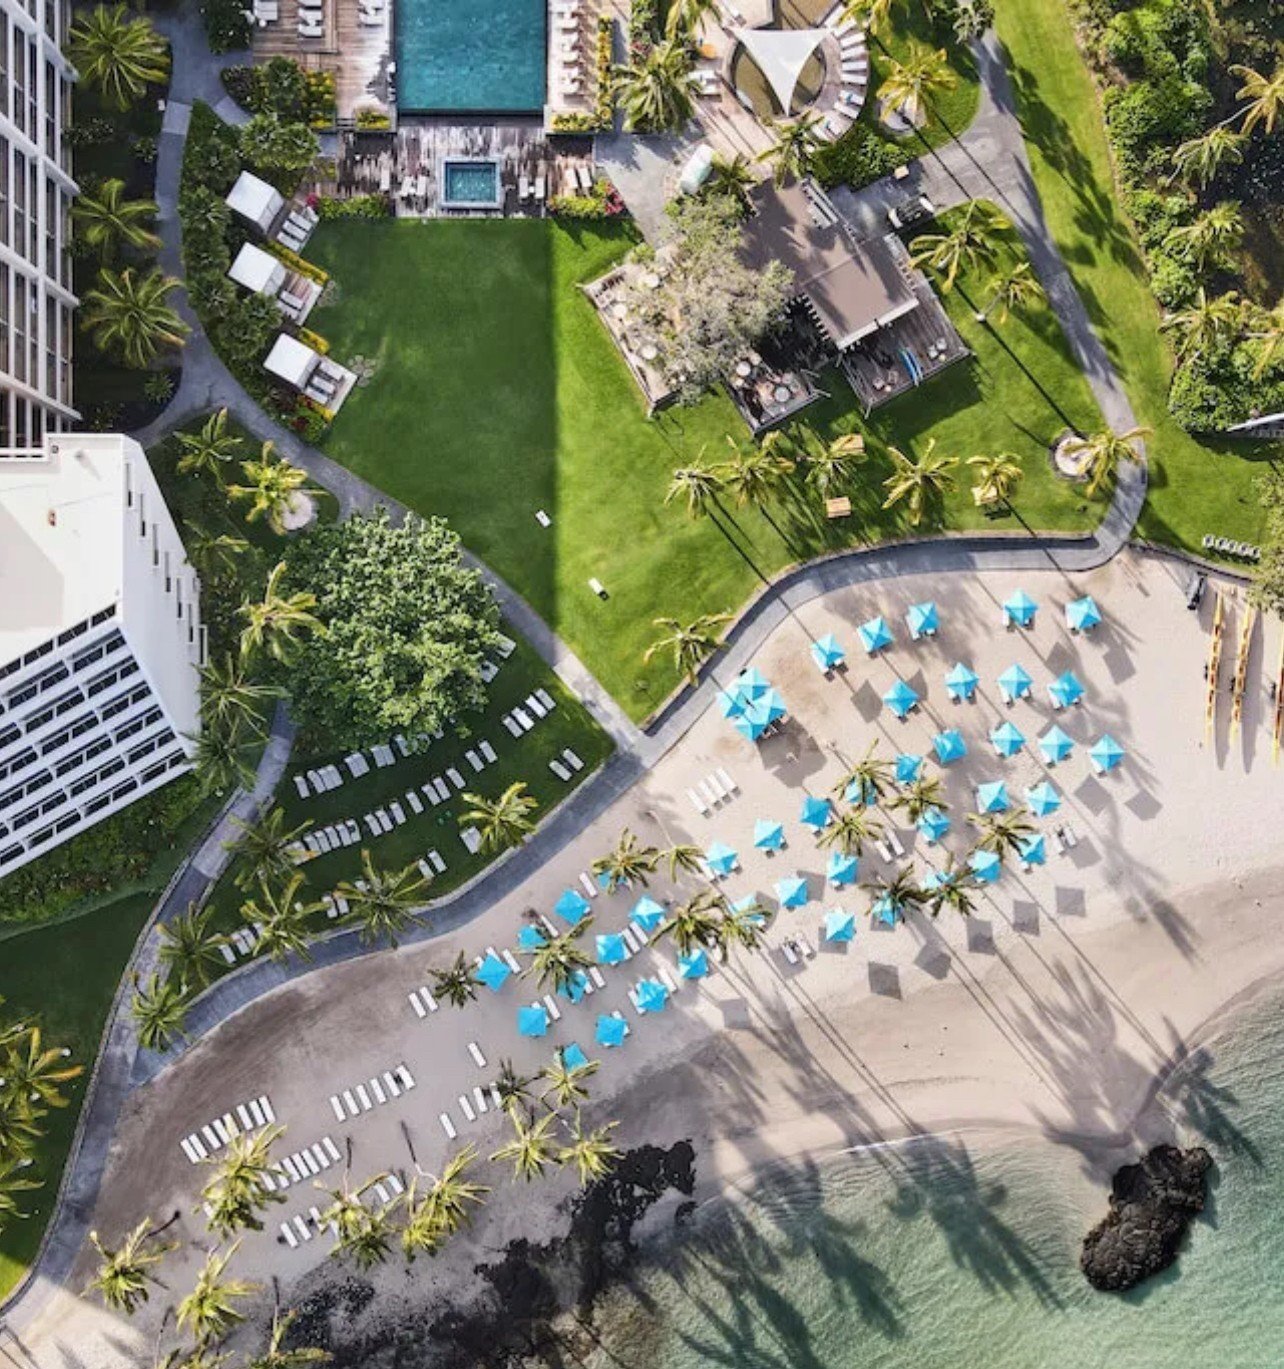 The ultimate summer destination! @maunalaniauberge is one of our go-to resorts for couples and families headed to Hawaii for so many reasons. From their spacious rooms with mountain or ocean views (suites and residences too!), to their adventurous ki